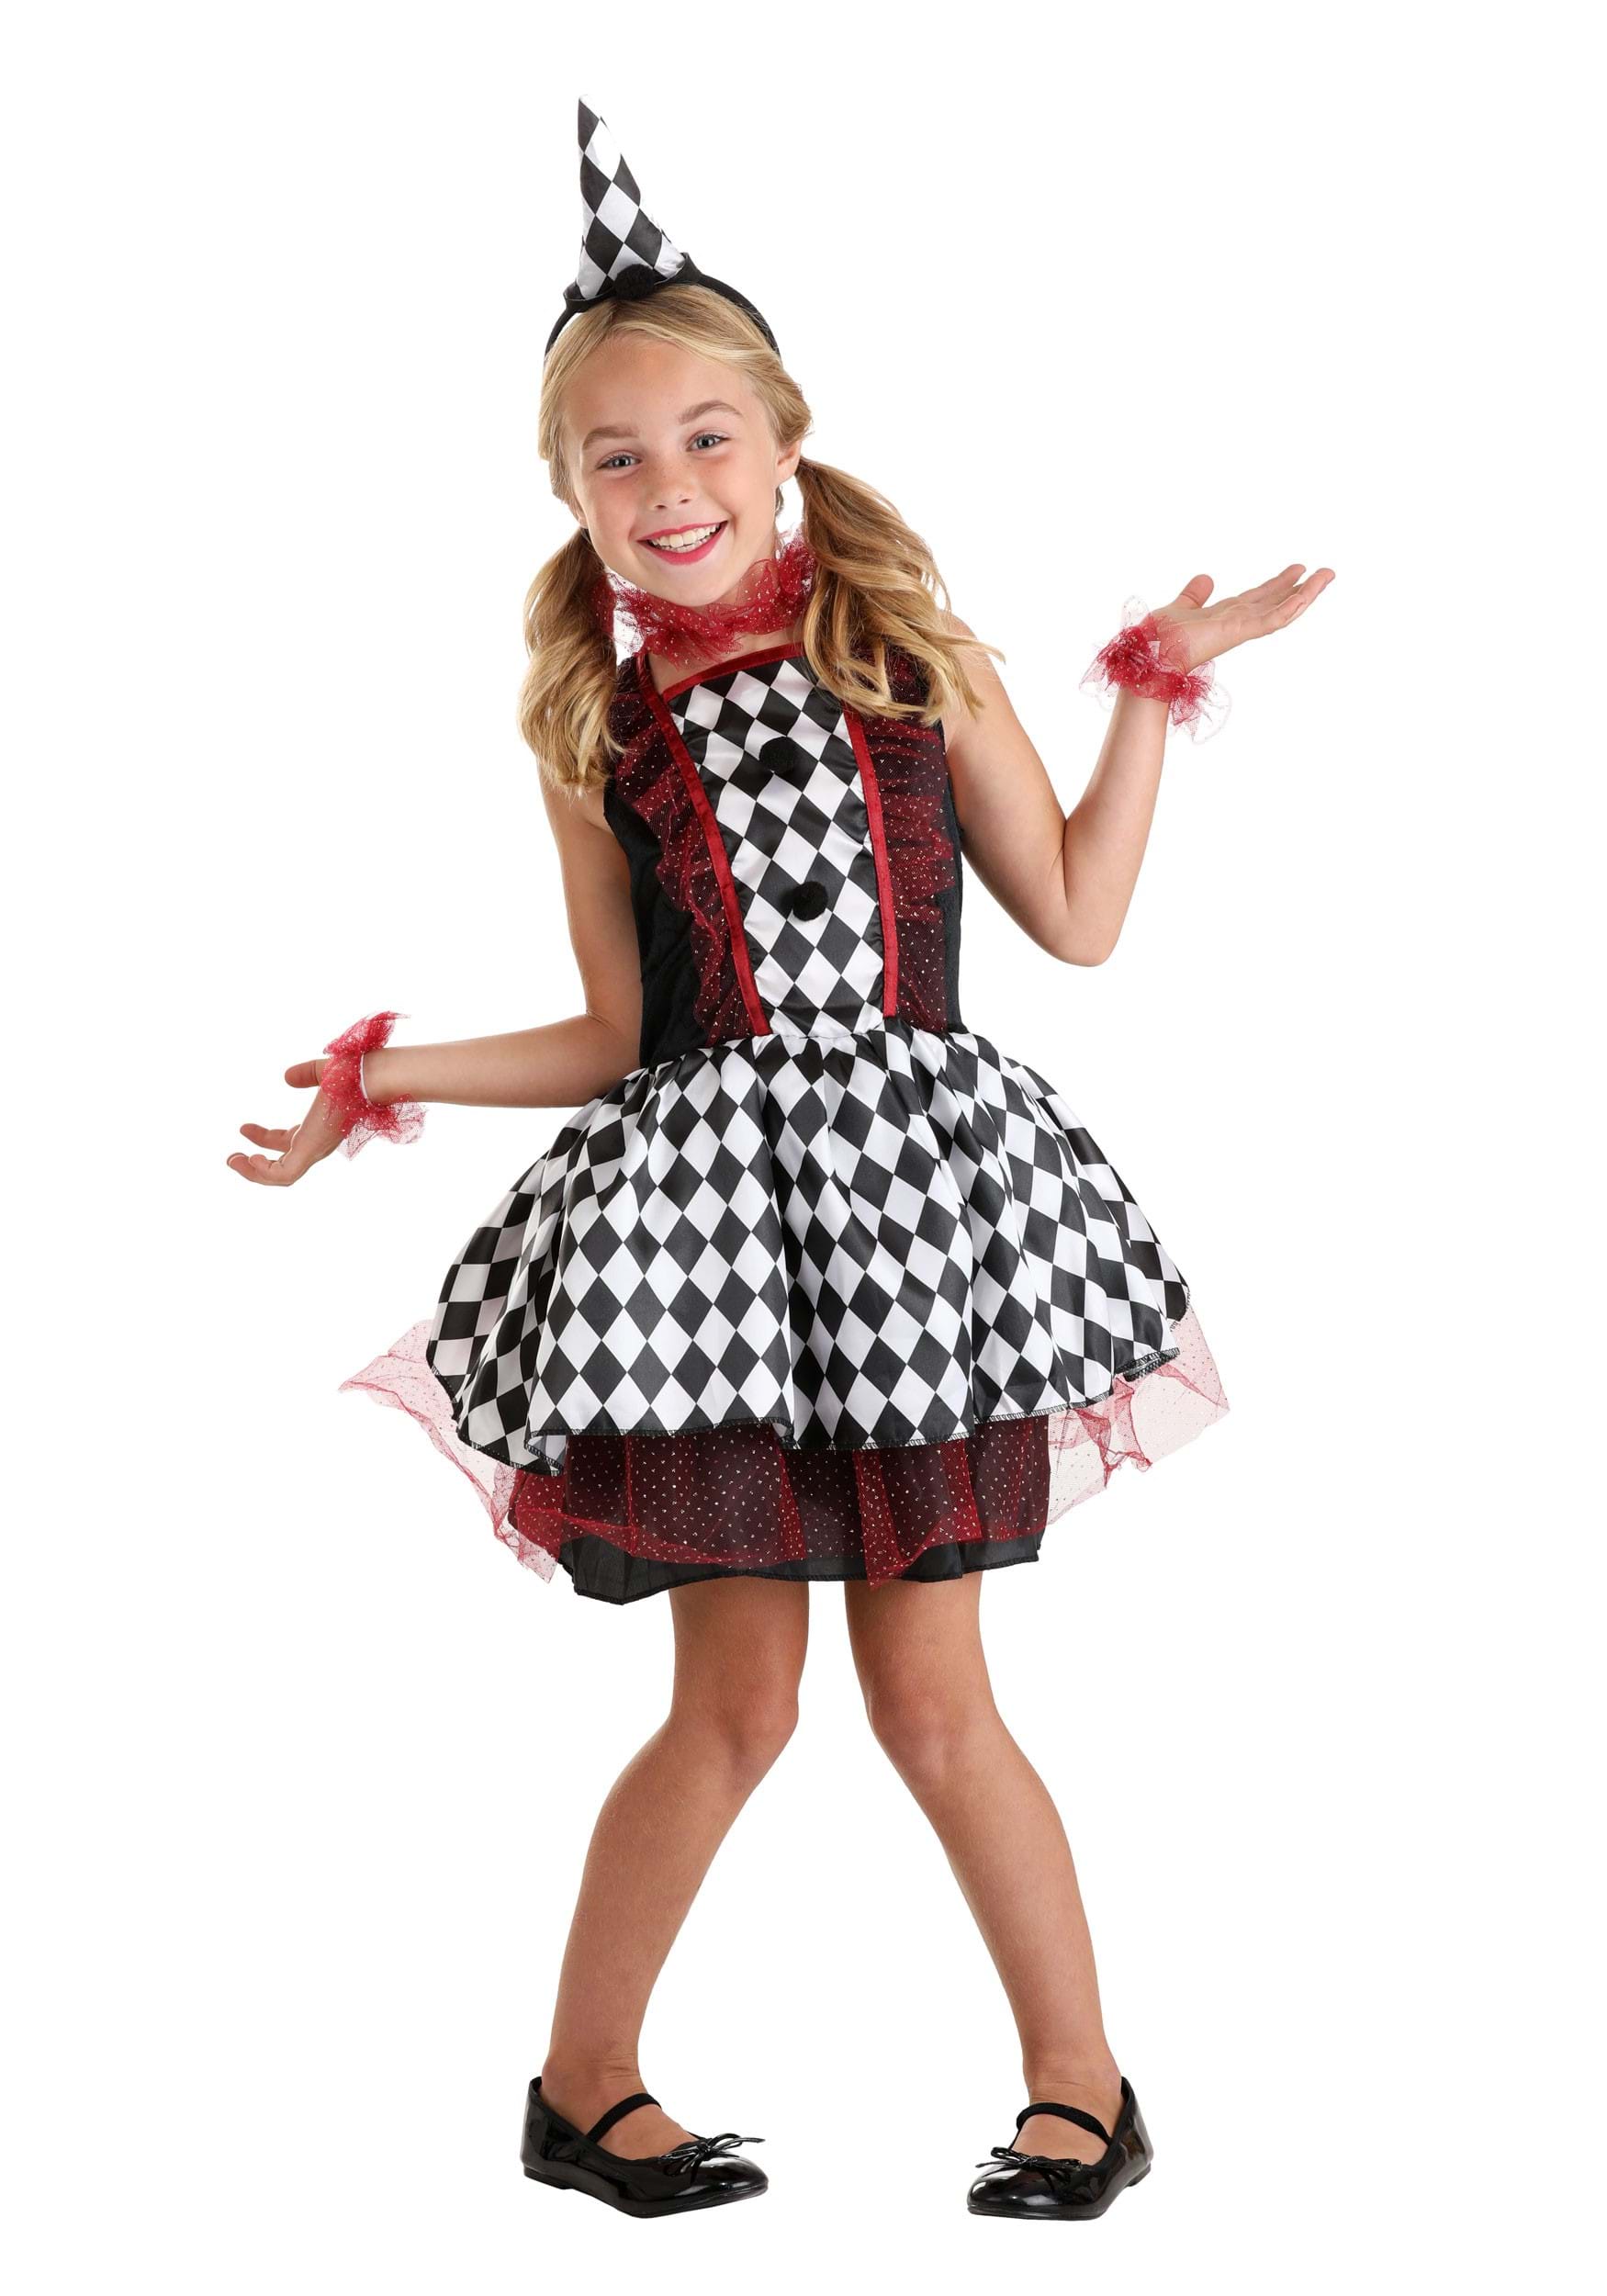 Photos - Fancy Dress Harlequin Jerry Leigh Burgundy  Kid's Costume Black/Red/White 